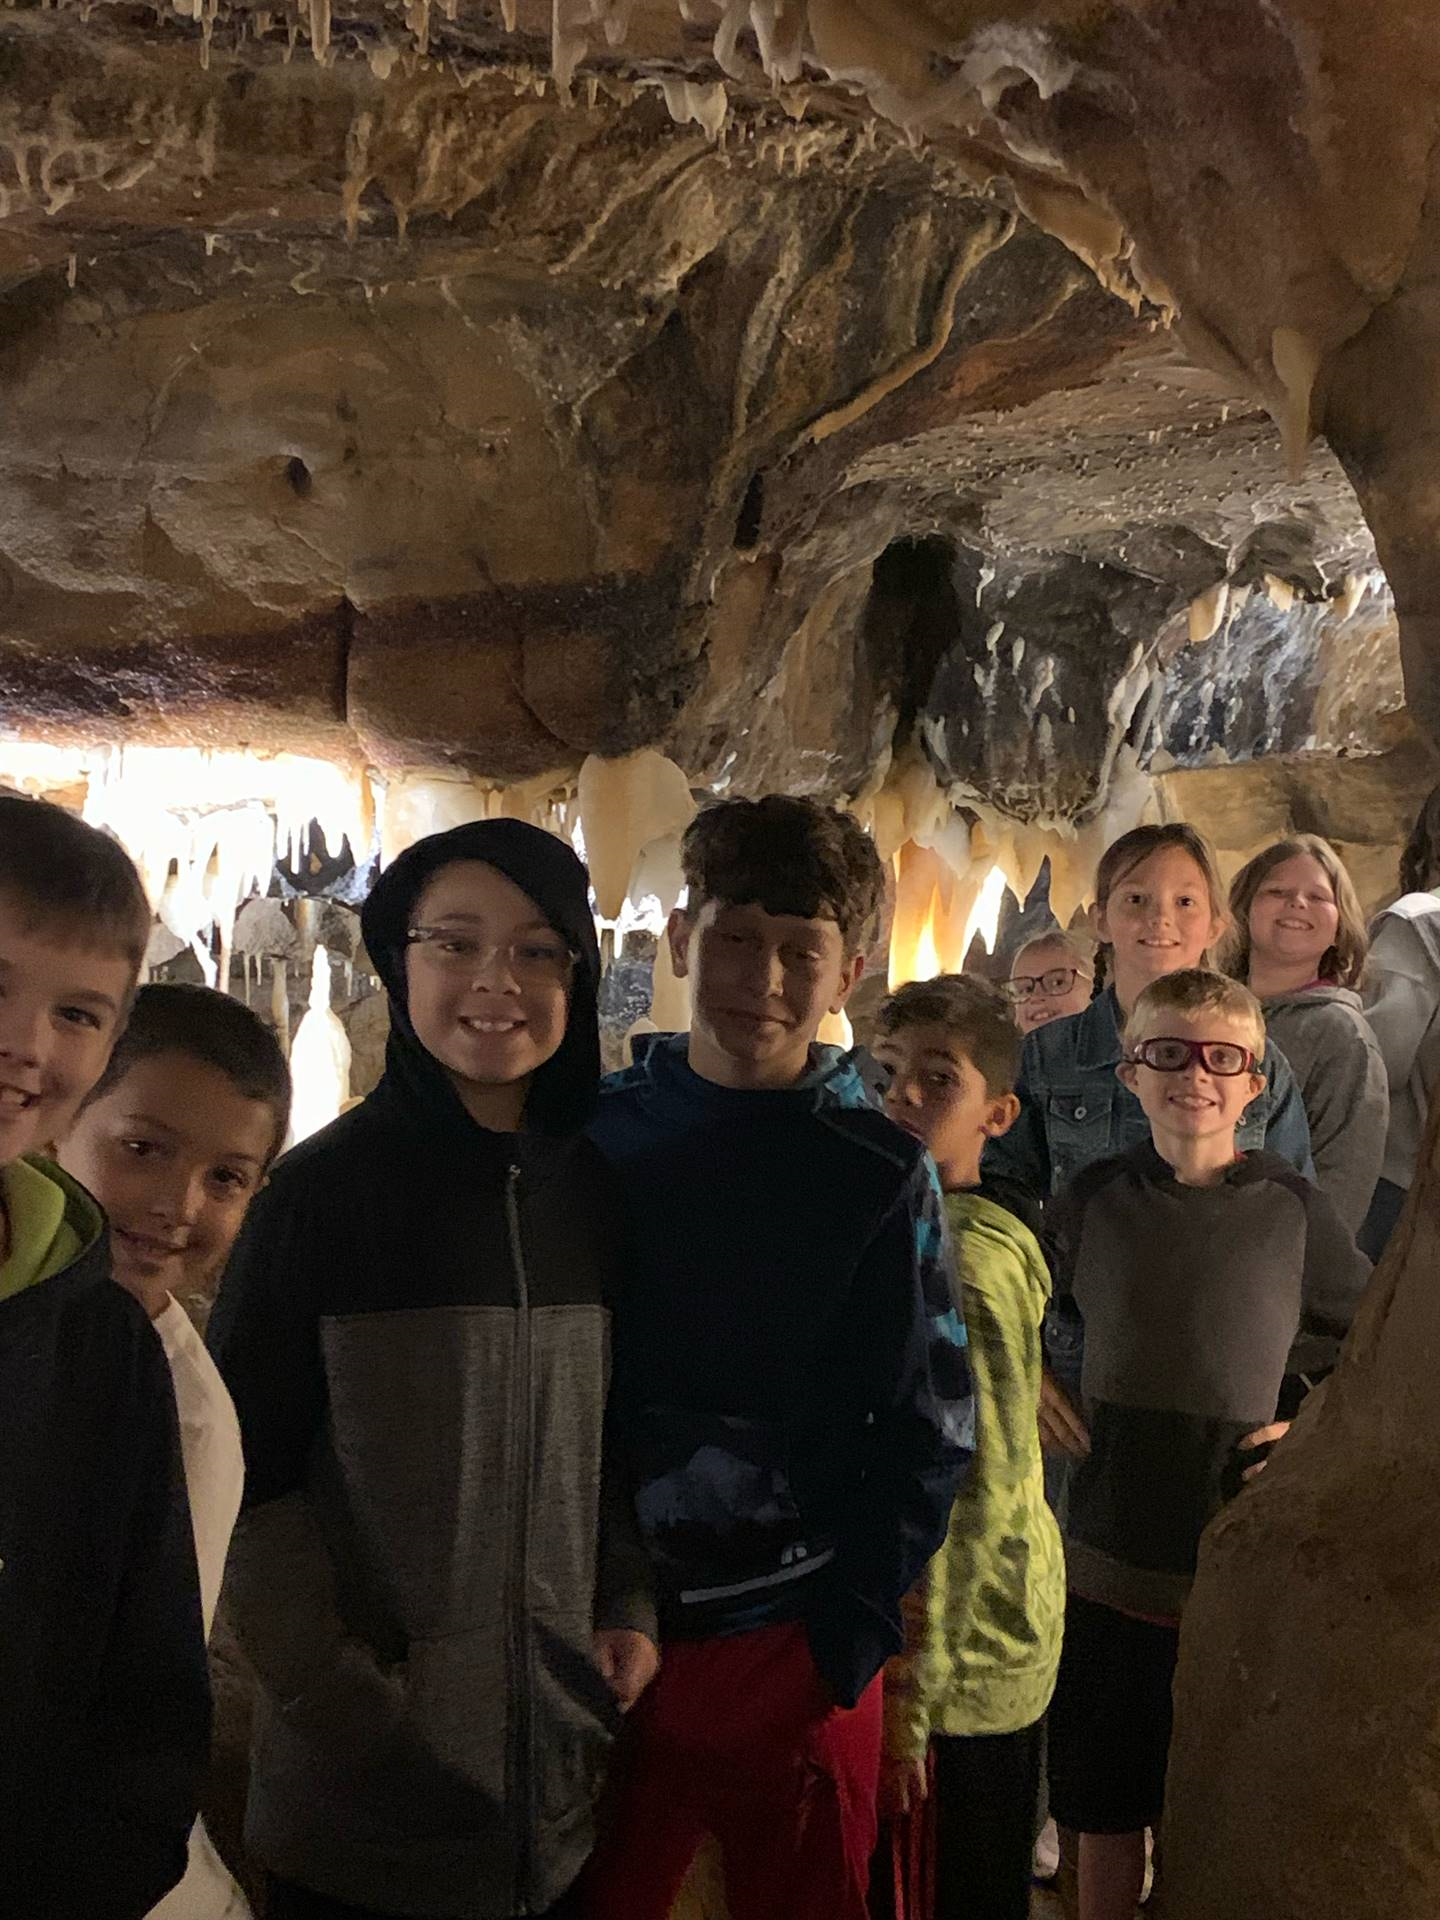 Ohio Caverns field trip, fossils with students